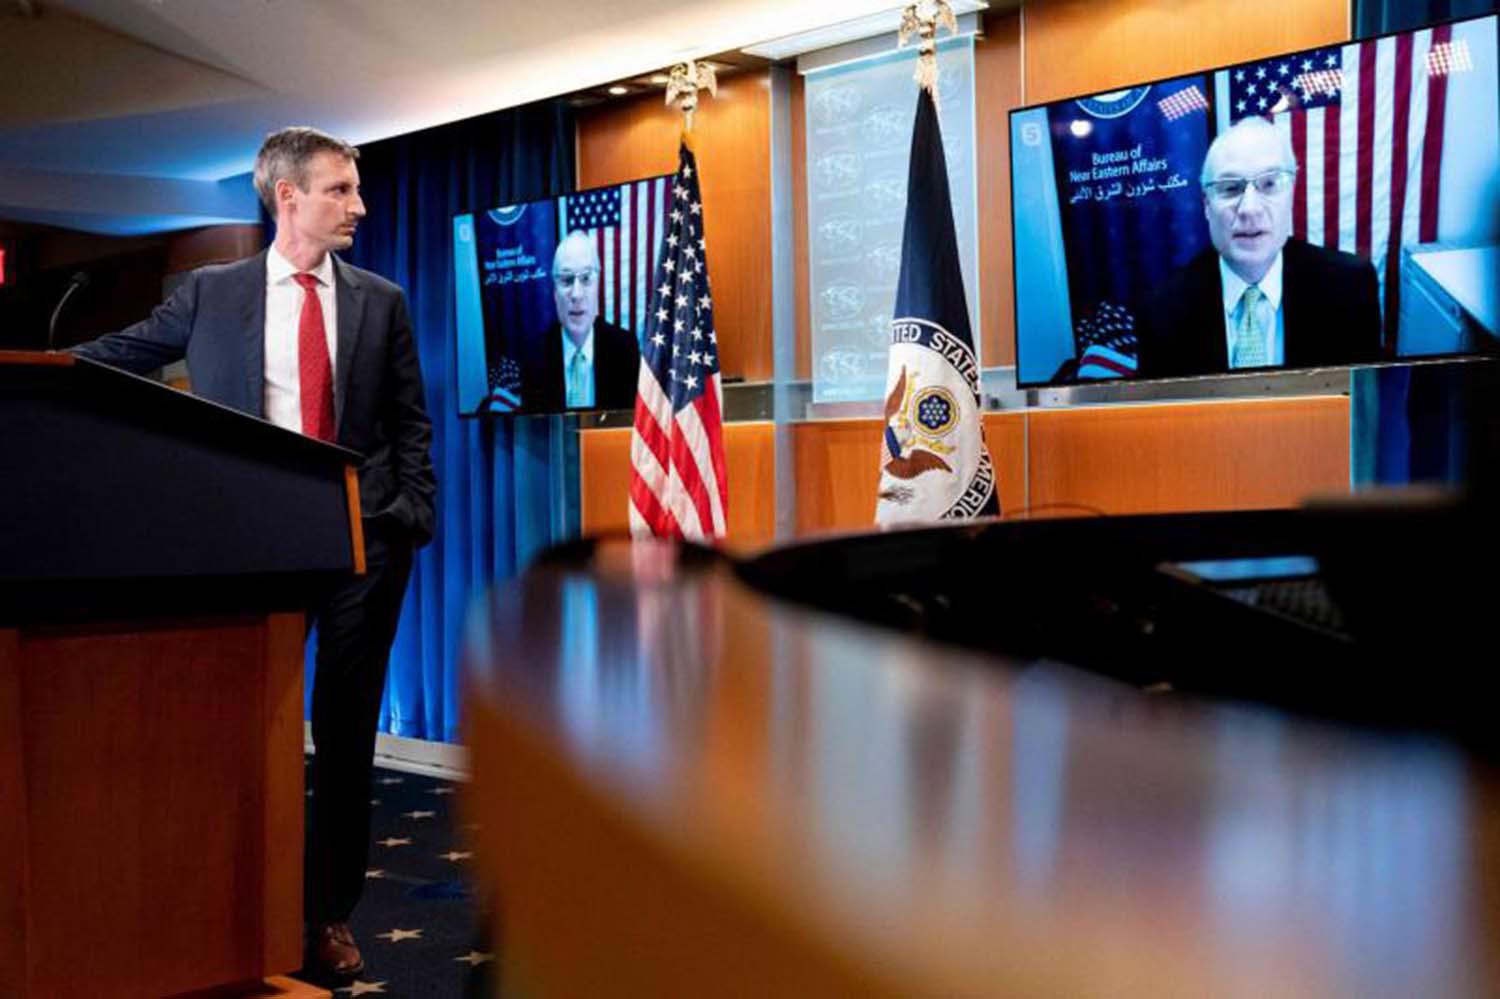 State Department spokesman Ned Price (L) listens as US special envoy for Yemen Timothy Lenderking speaks via teleconference during a news conference at the State Department in Washington